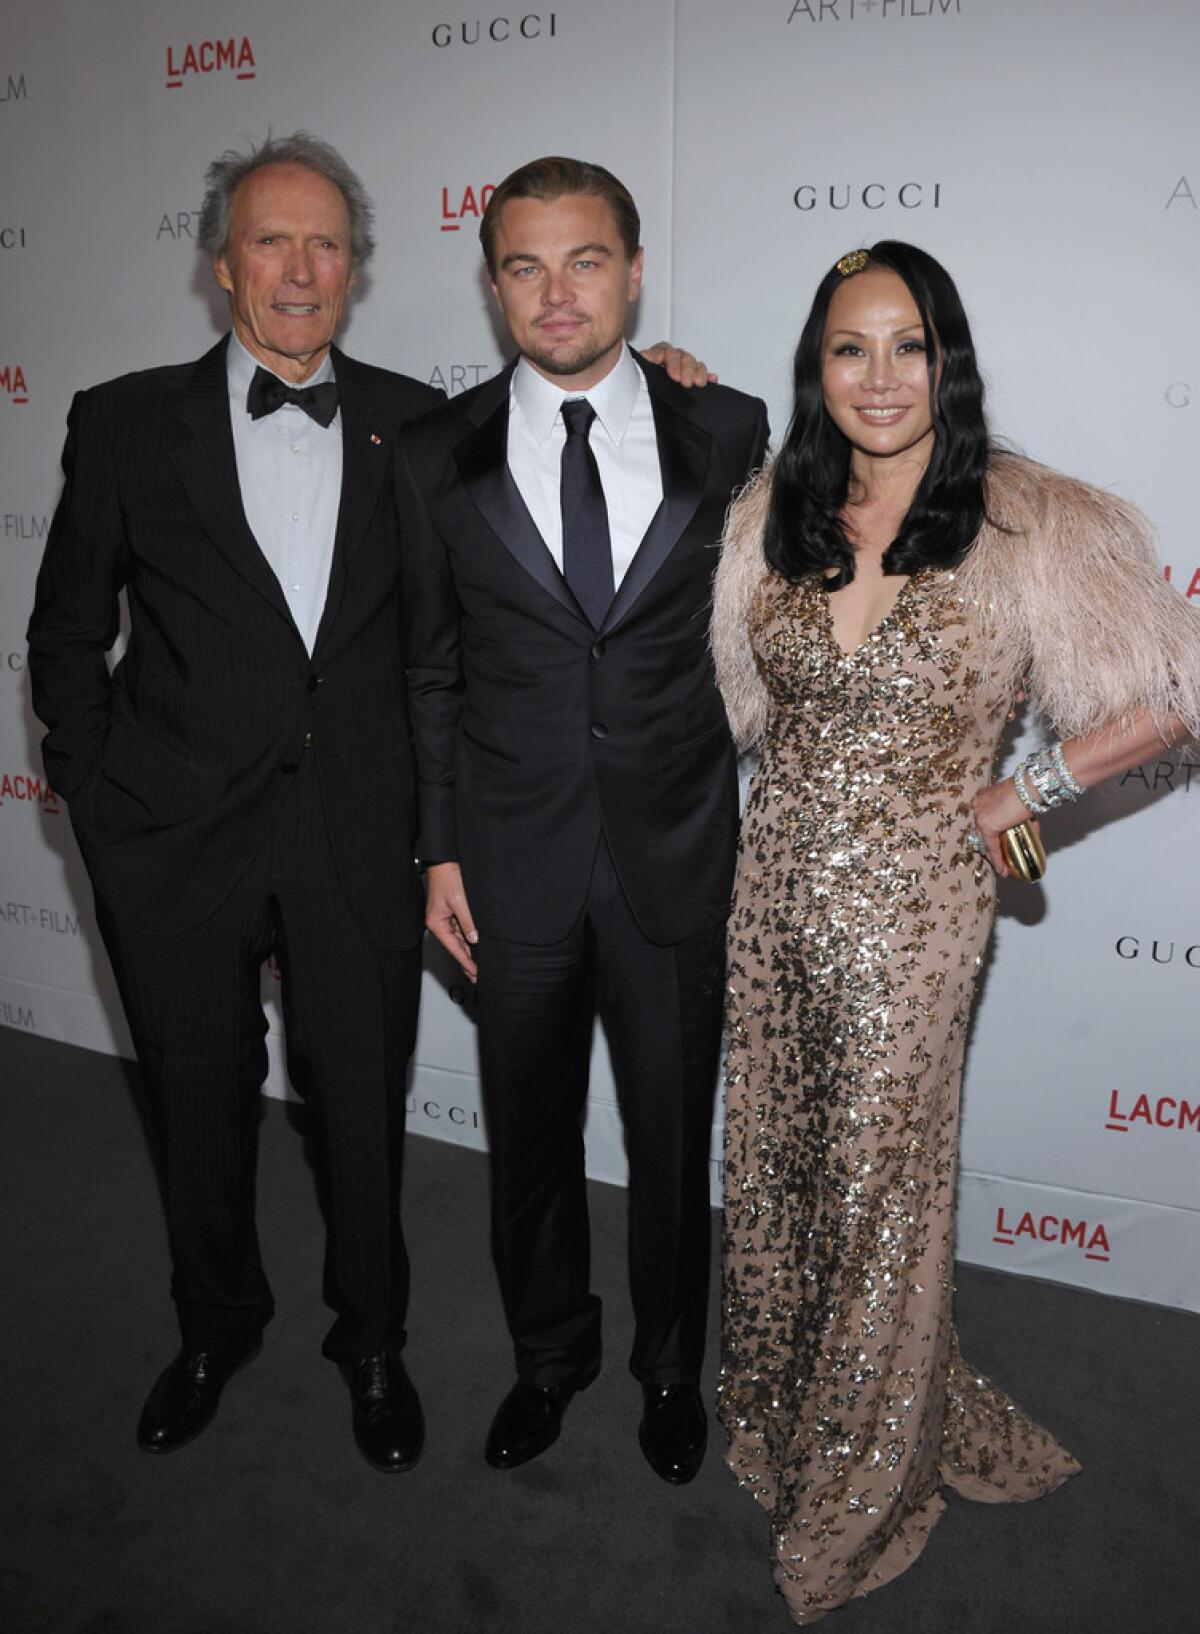 Trustee and co-chair Eva Chow and actor and co-chair Leonardo DiCaprio at the 2011 LACMA Art + Film Gala, with honoree Clint Eastwood.